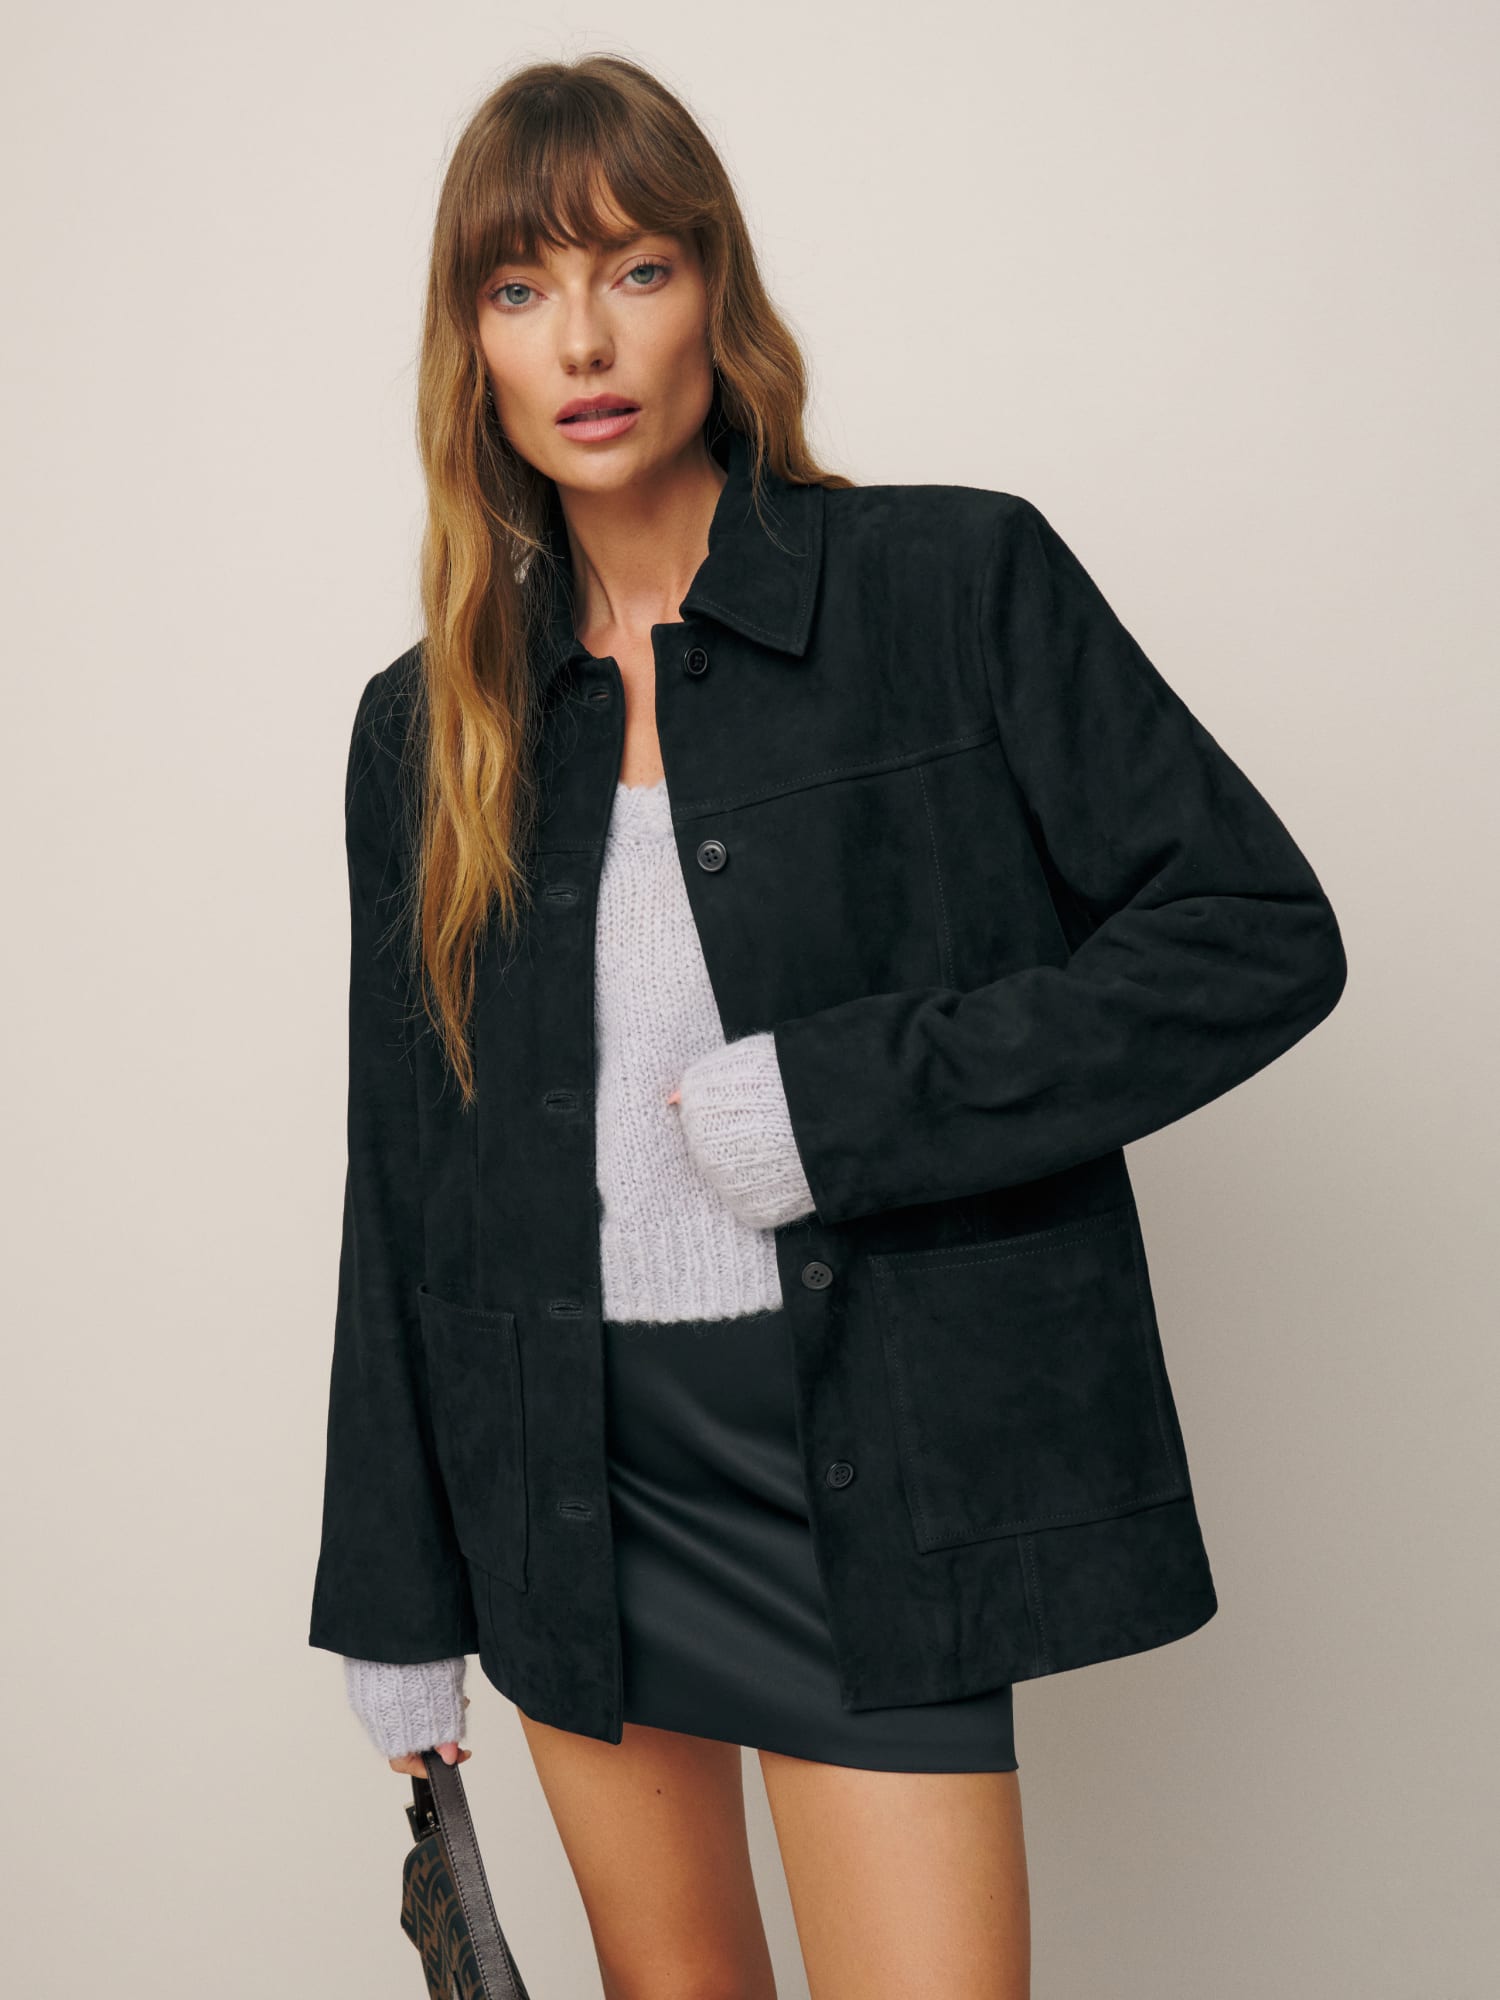 Veda Lincoln Suede Shirt Jacket - Long Sleeve | Reformation